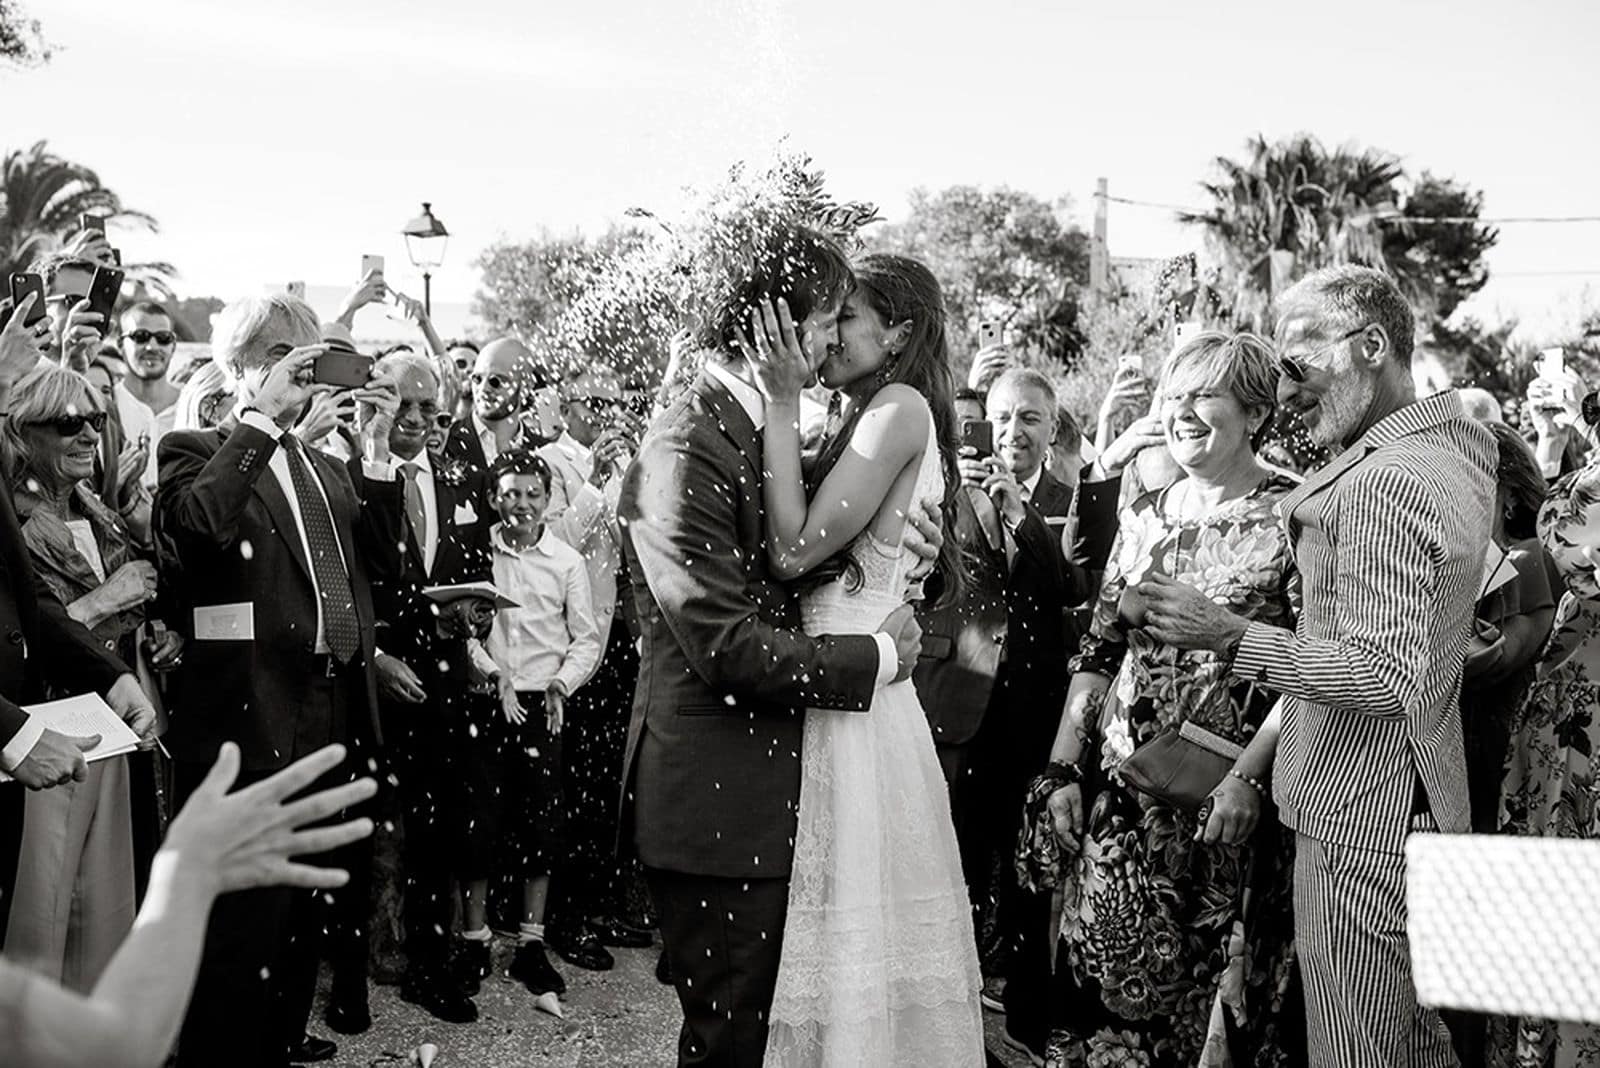 Bride and groom kiss in front of guests after wedding ceremony